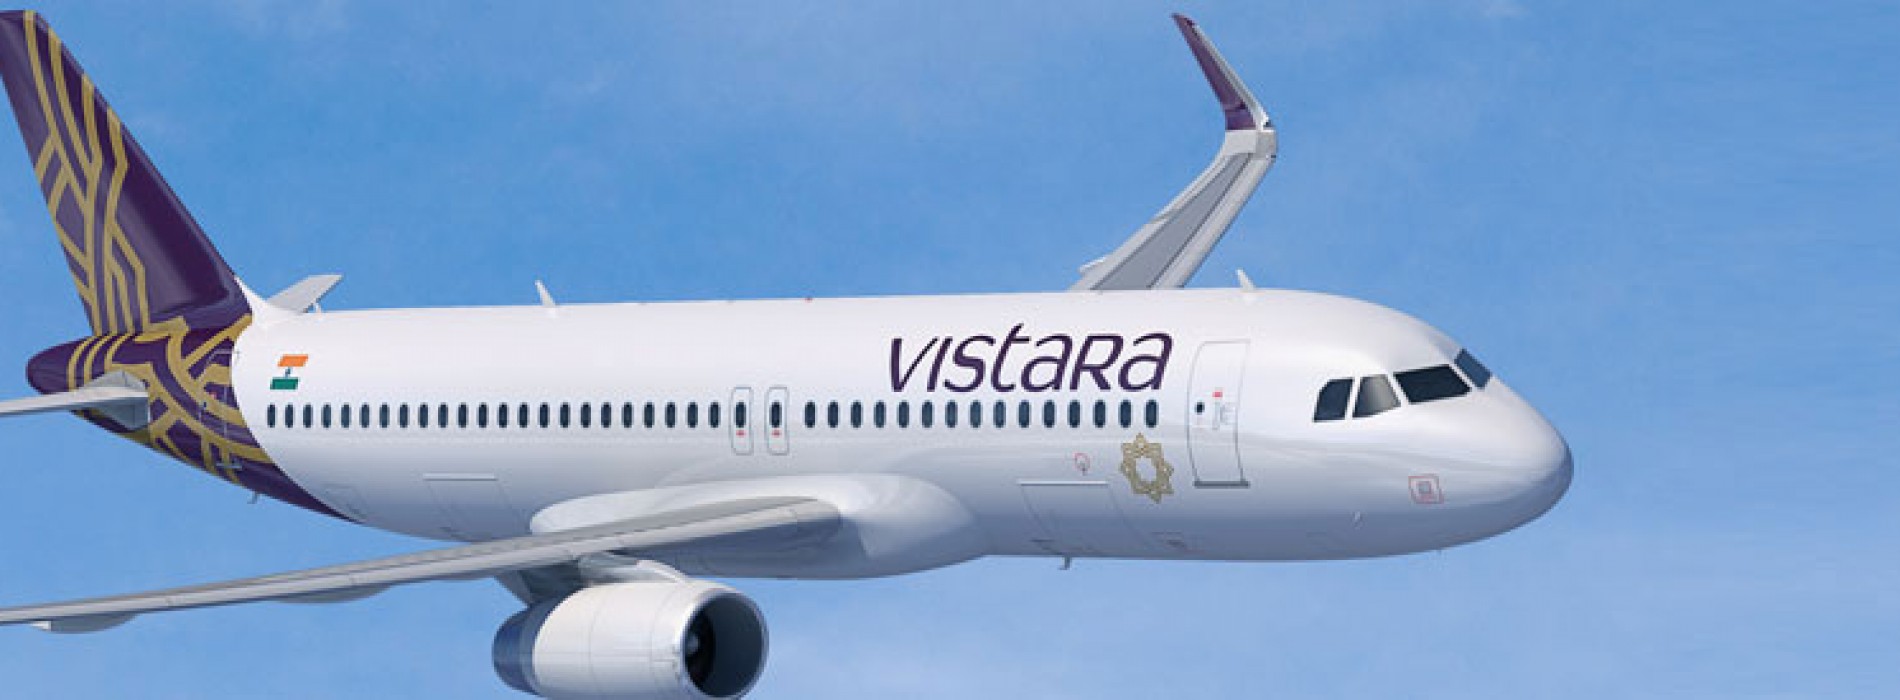 Former SpiceJet COO Sanjiv Kapoor joins Vistara as commercial and strategy chief